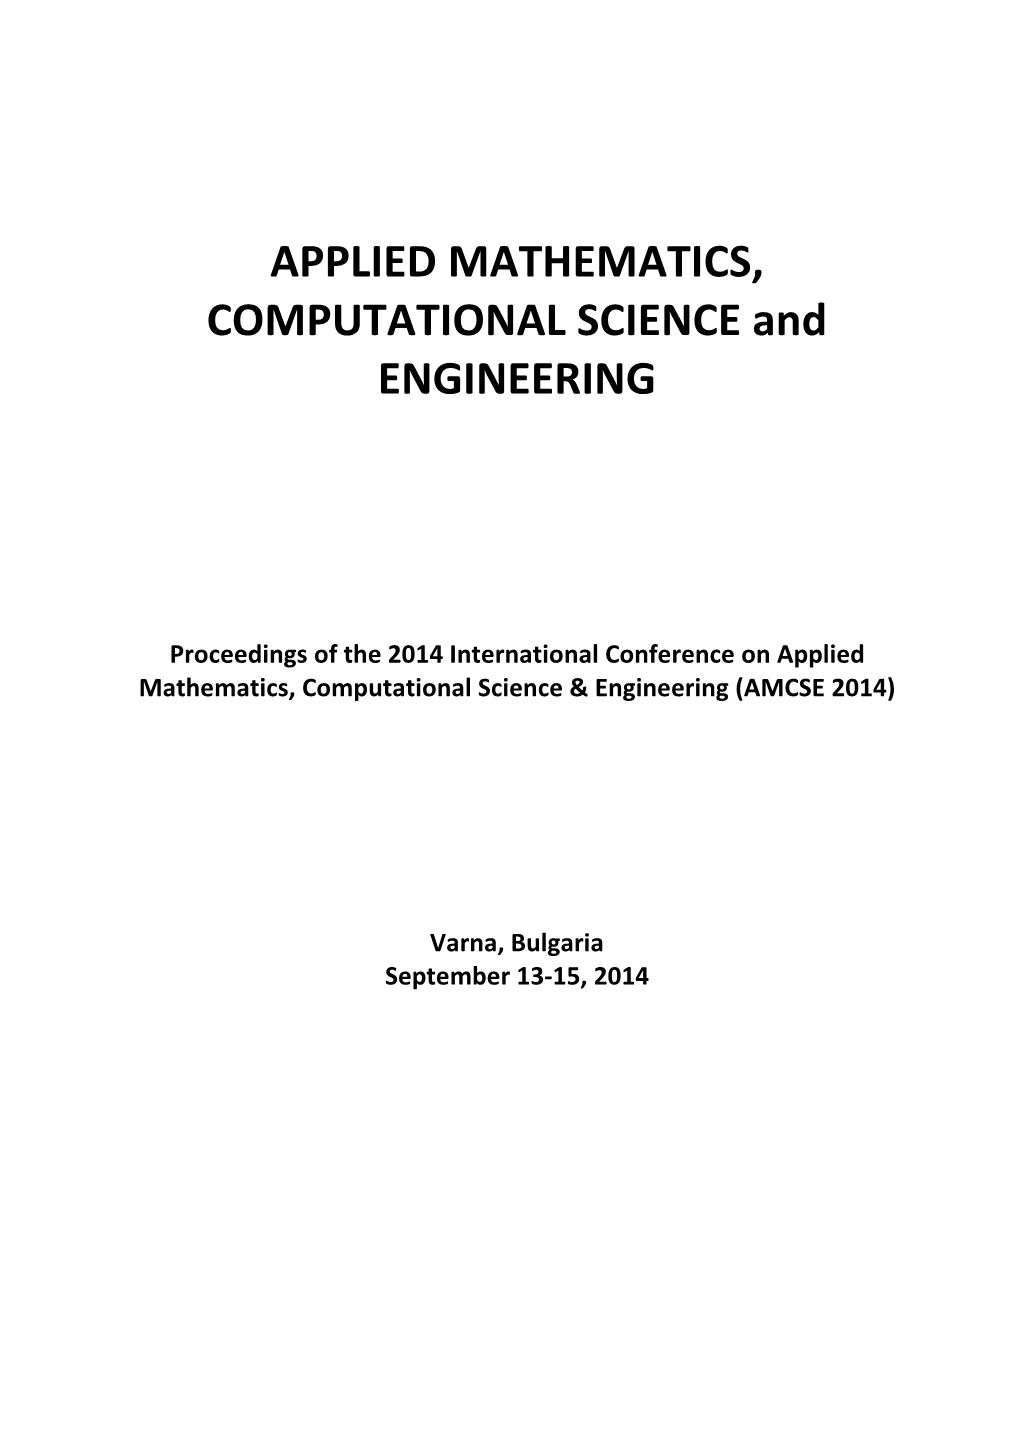 APPLIED MATHEMATICS, COMPUTATIONAL SCIENCE And